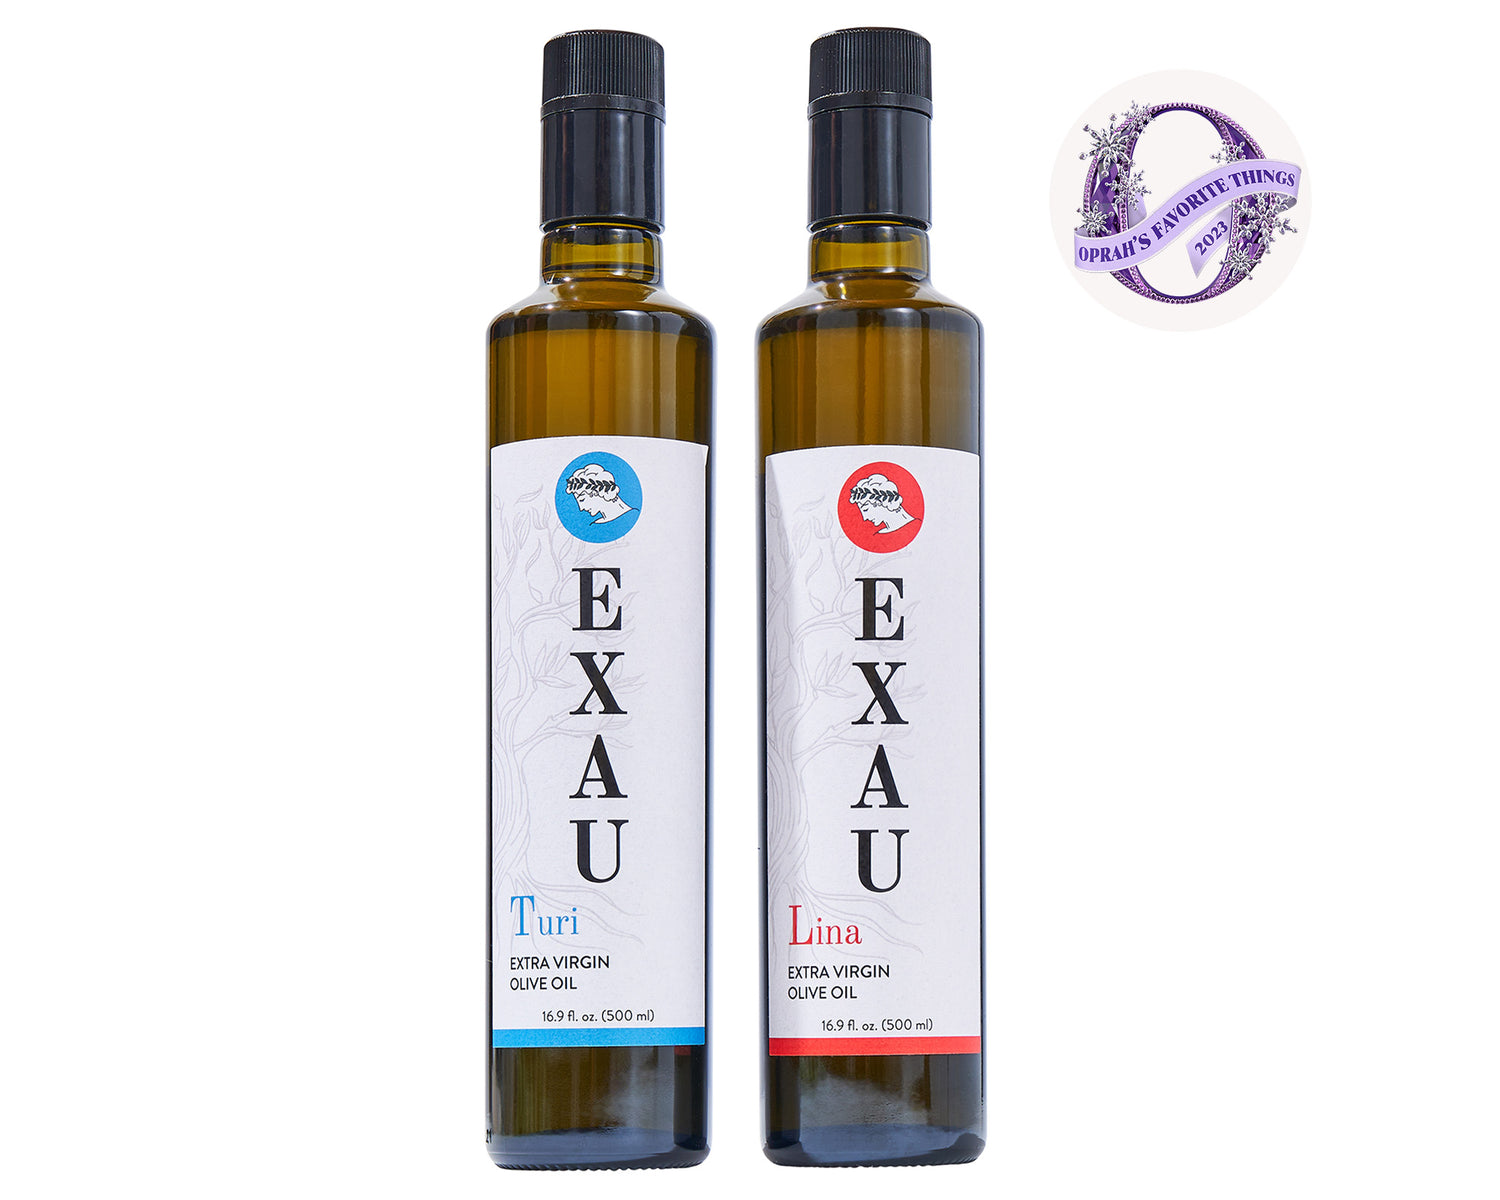 Shop High-Quality Italian Olive Oil Online - EXAU Olive Oil